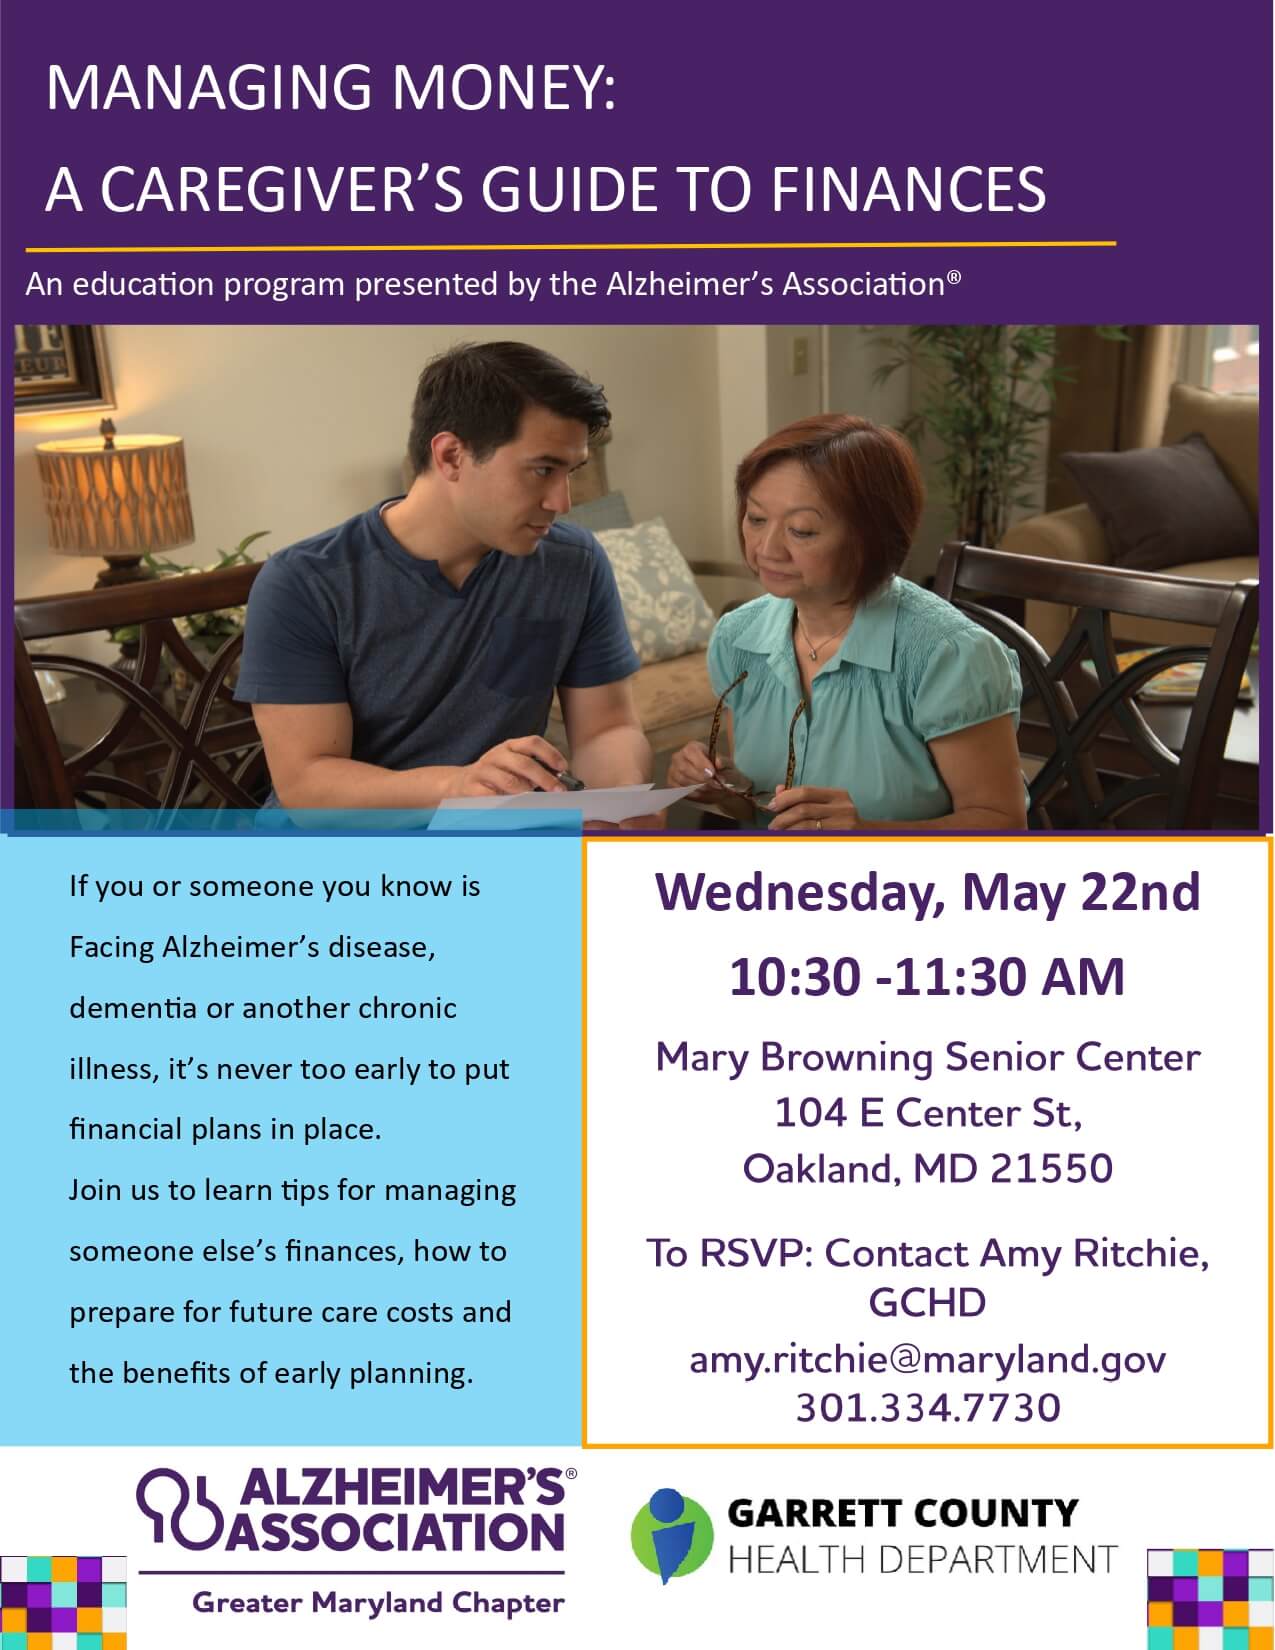 Managing Money – A Caregiver’s Guide to Finances at Deep Creek Lake, MD